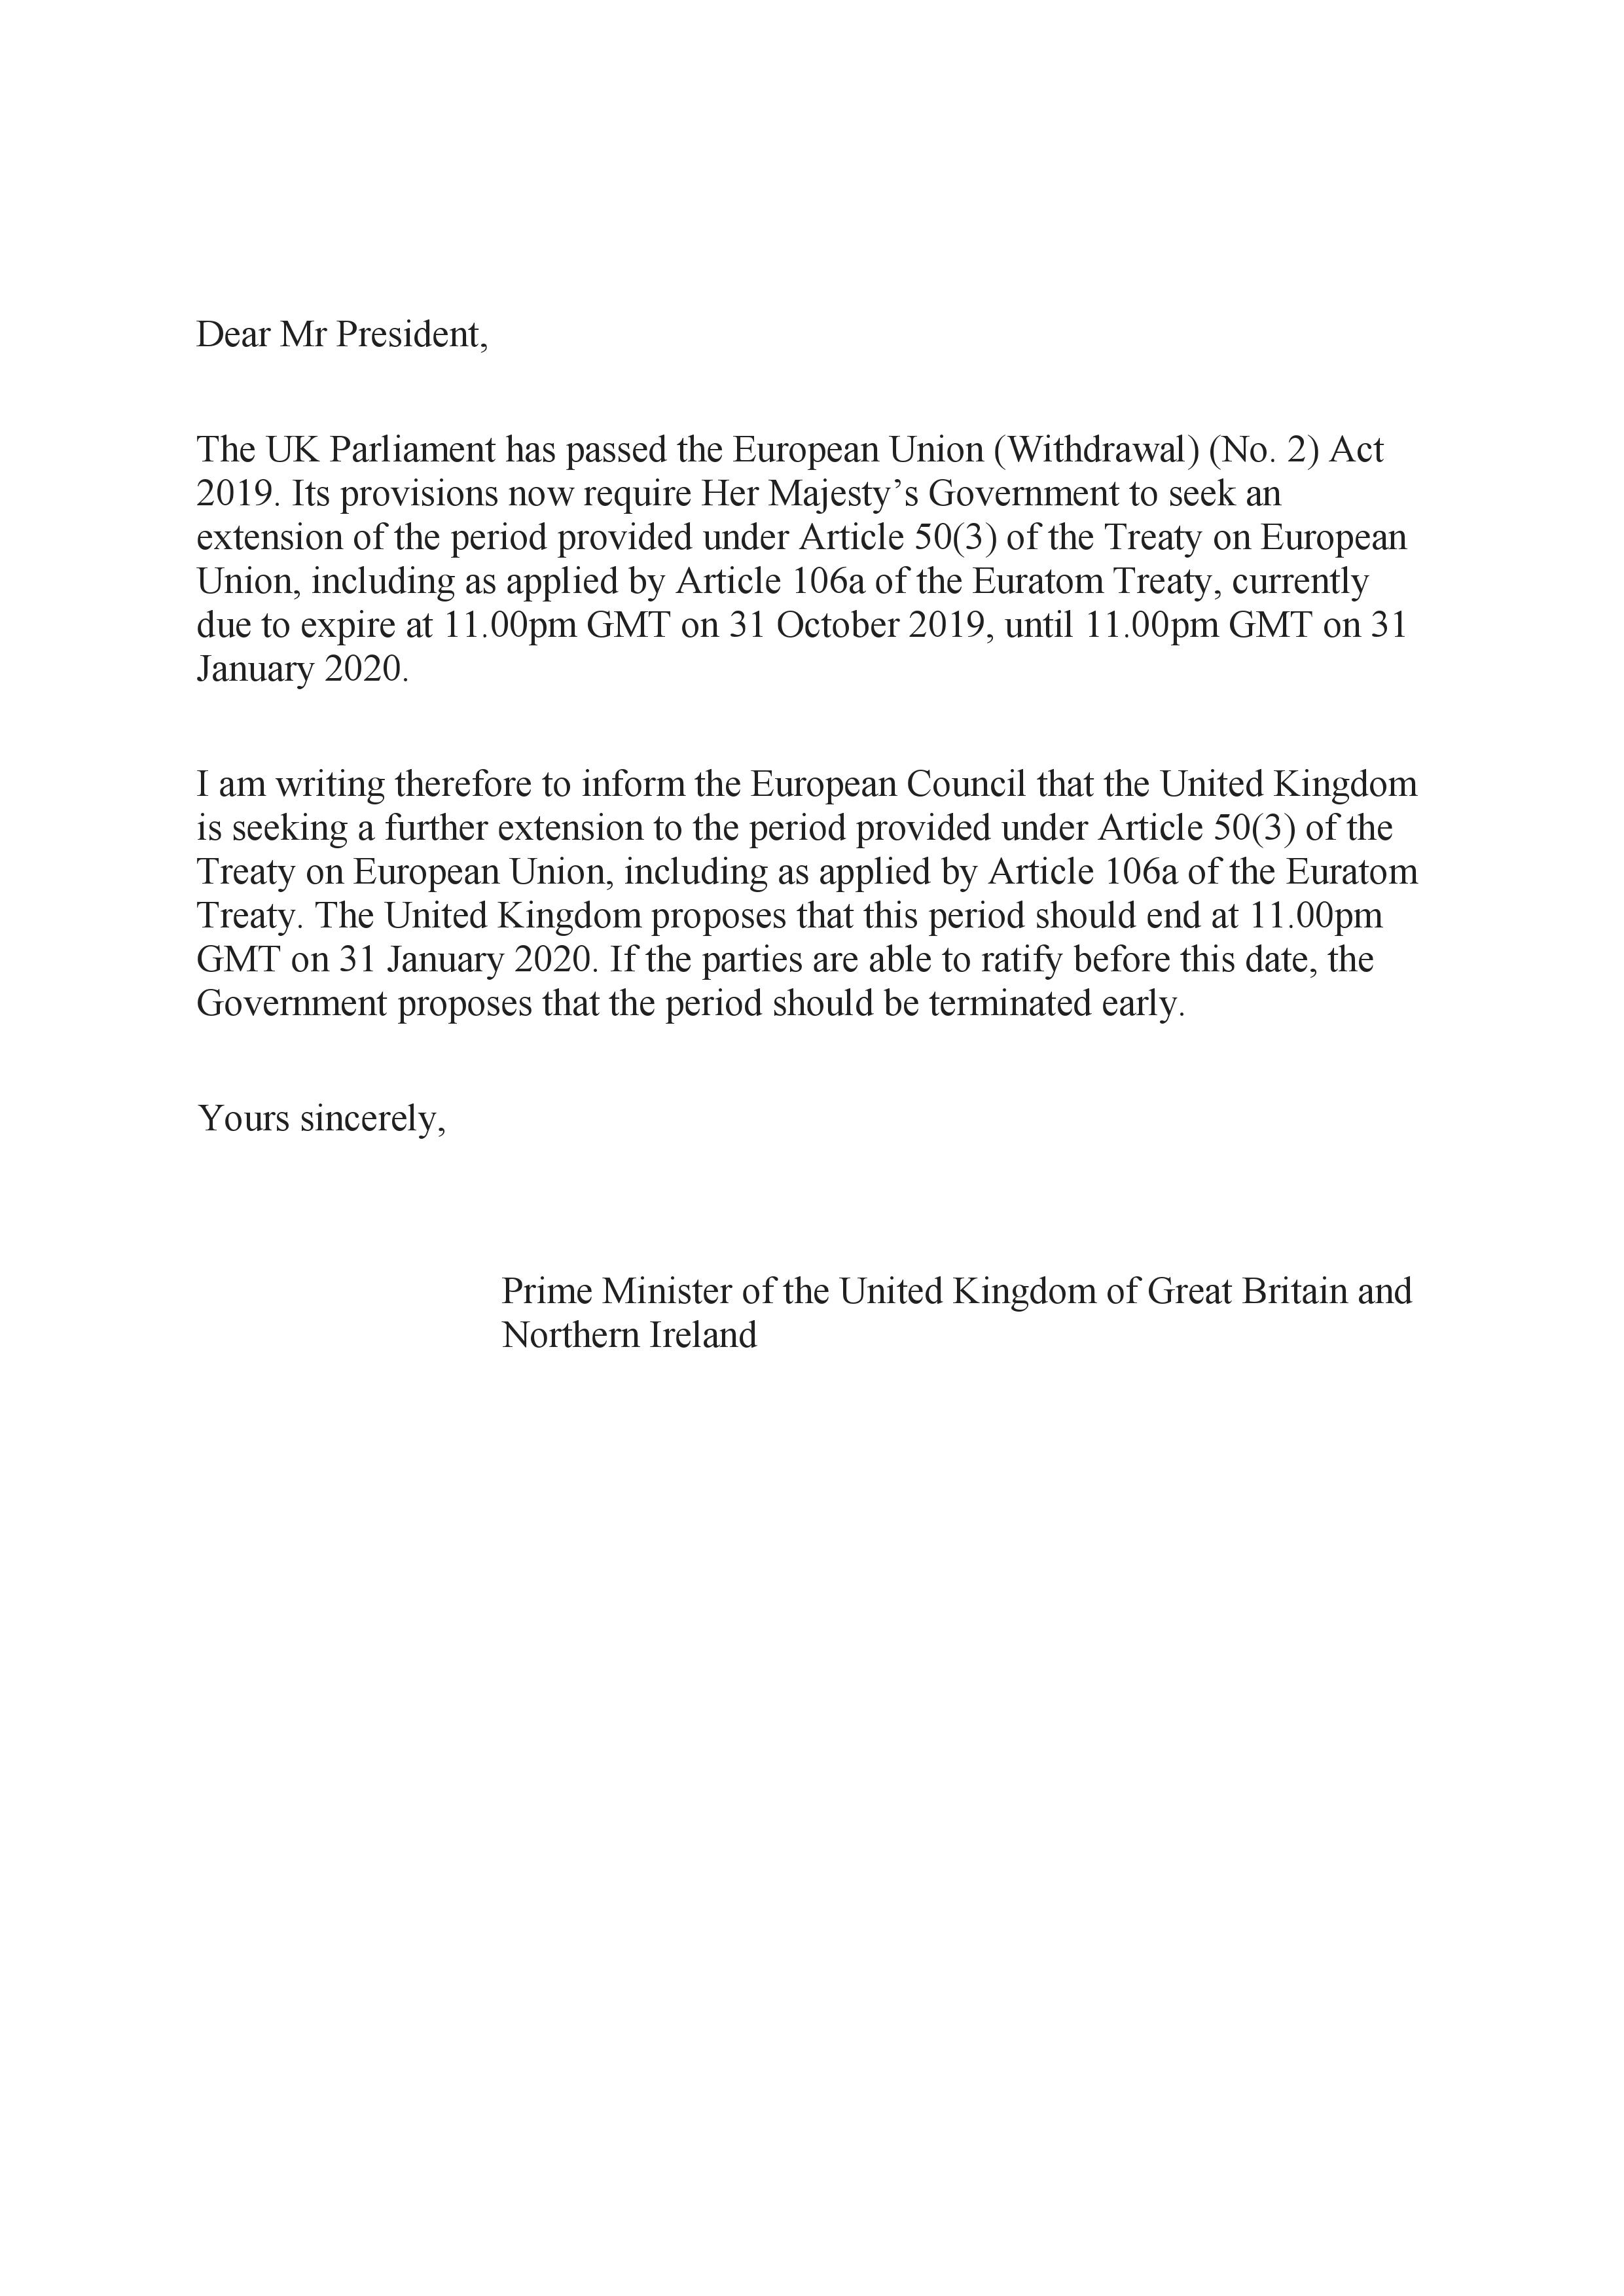 Unsigned letter from Boris Johnson to Donald Tusk